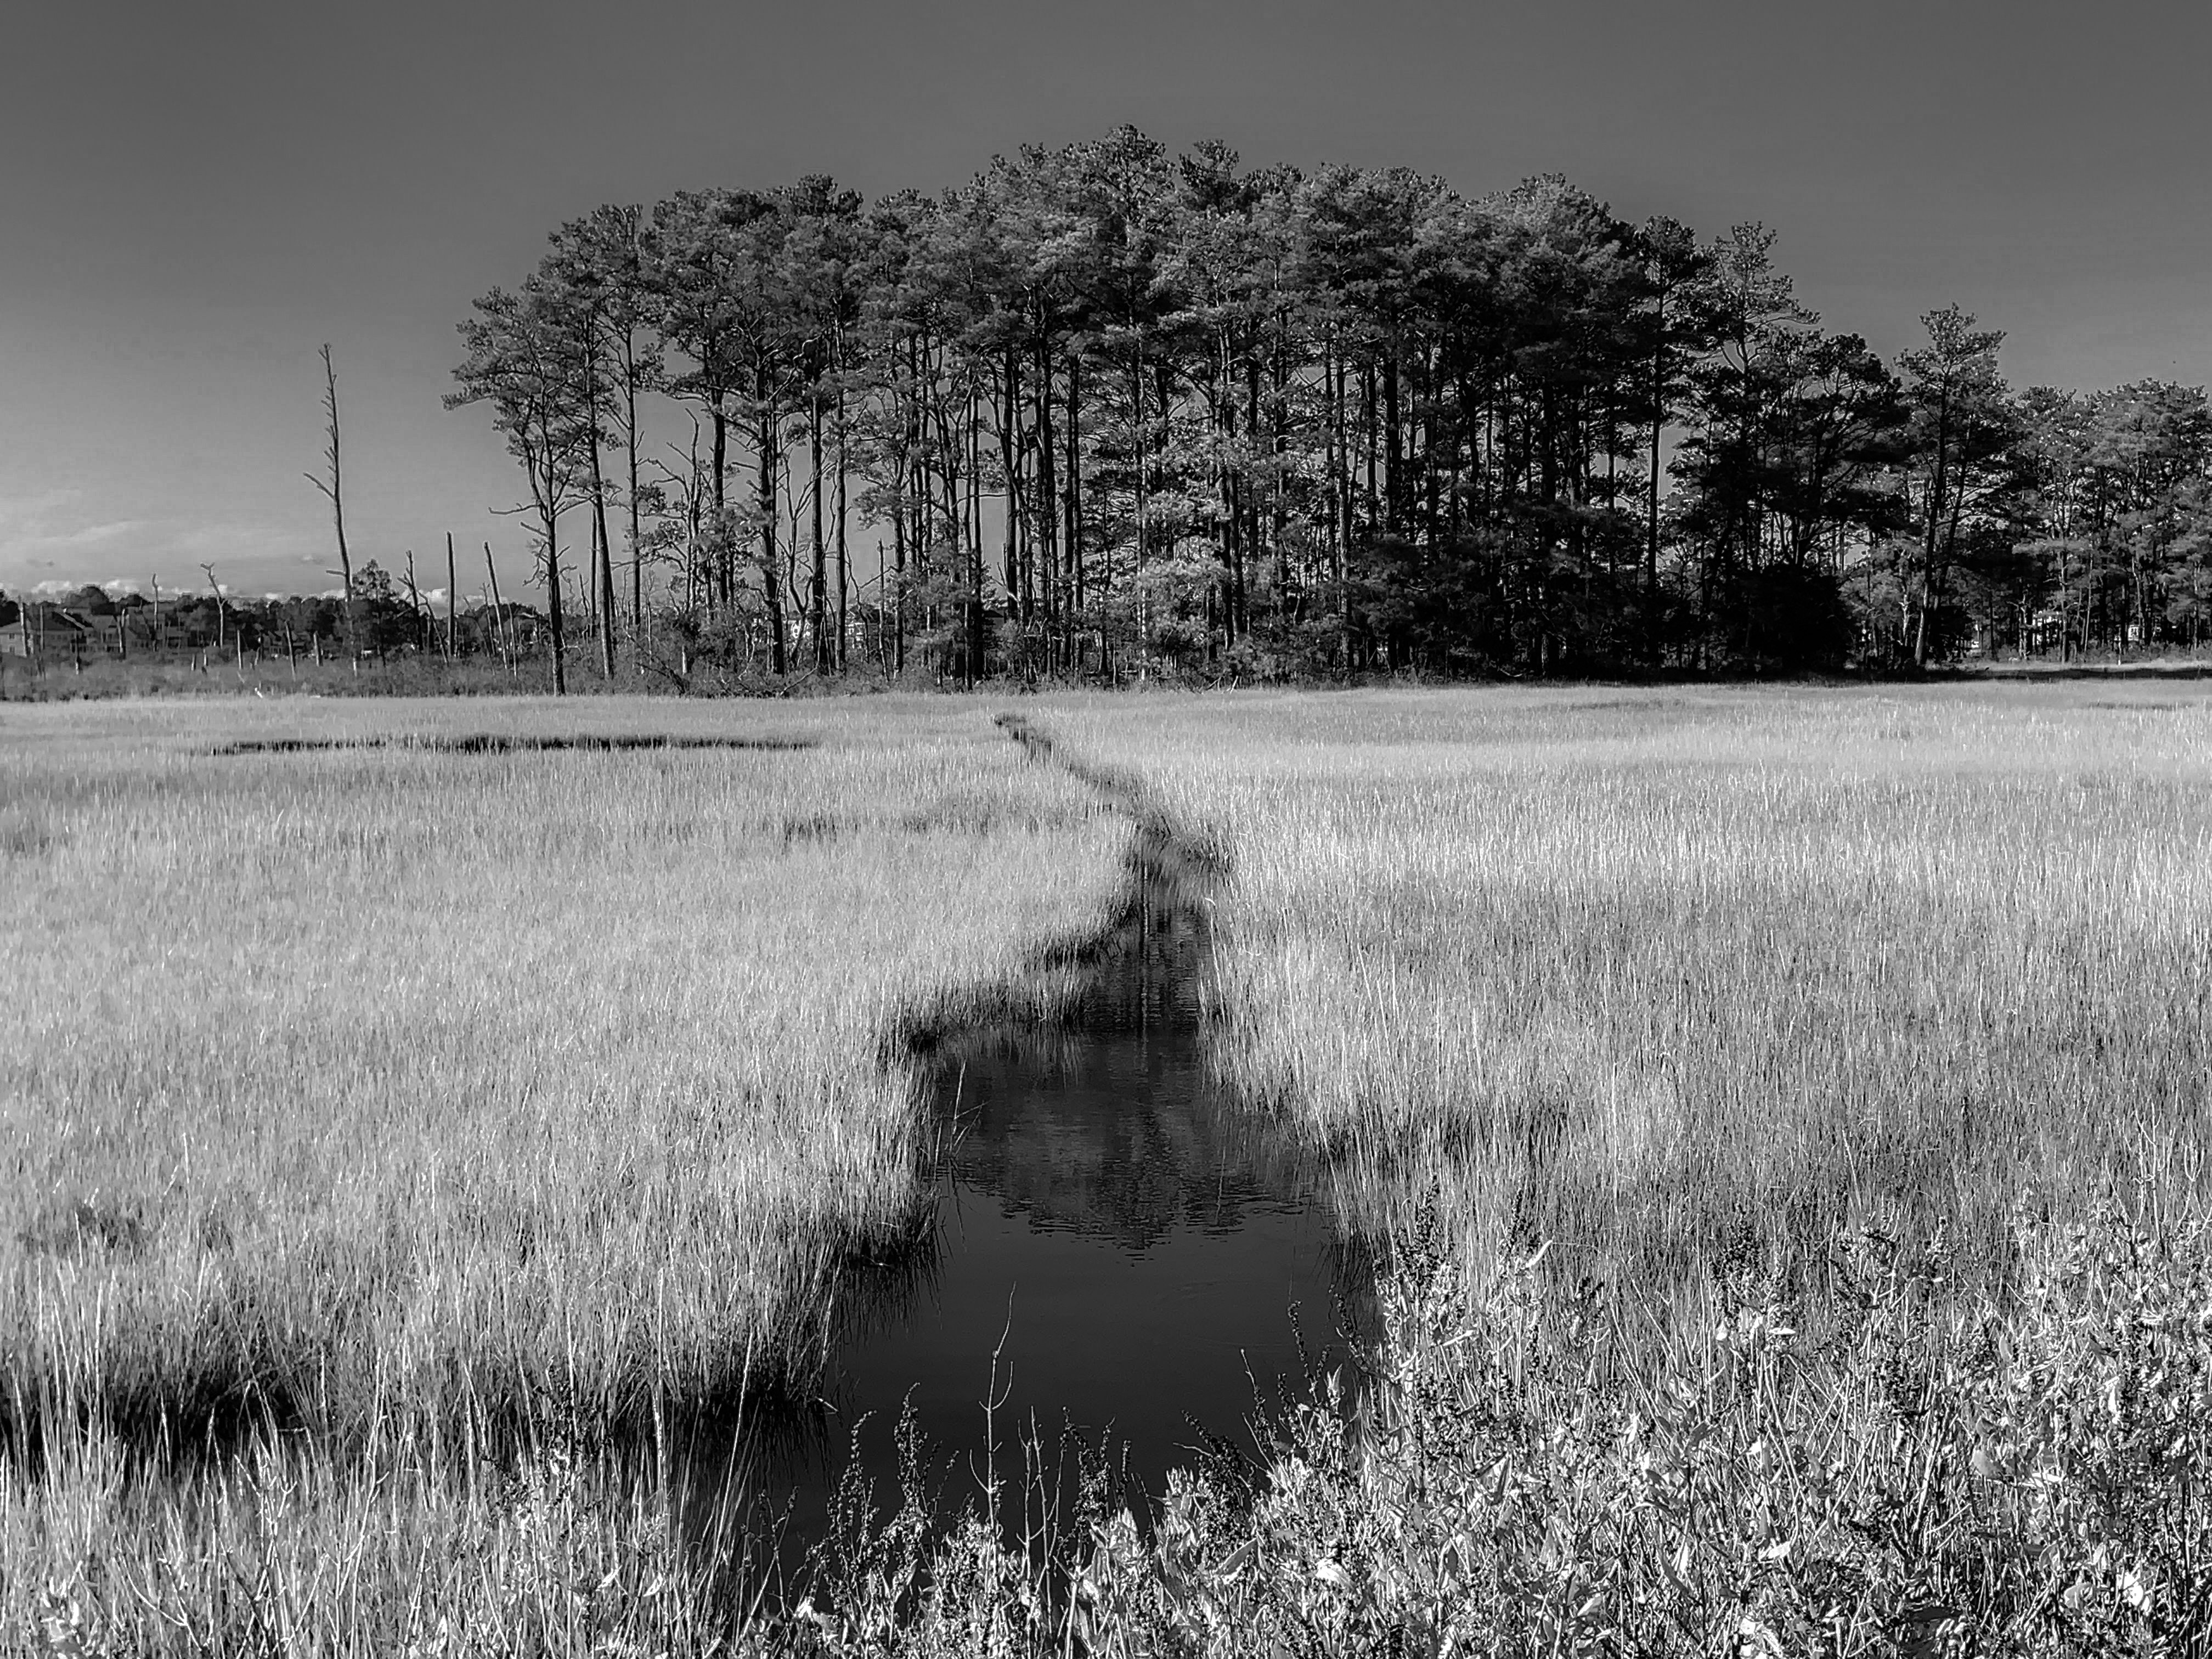 A black and white photo of a marsh near the Rehoboth Bay, Delaware.